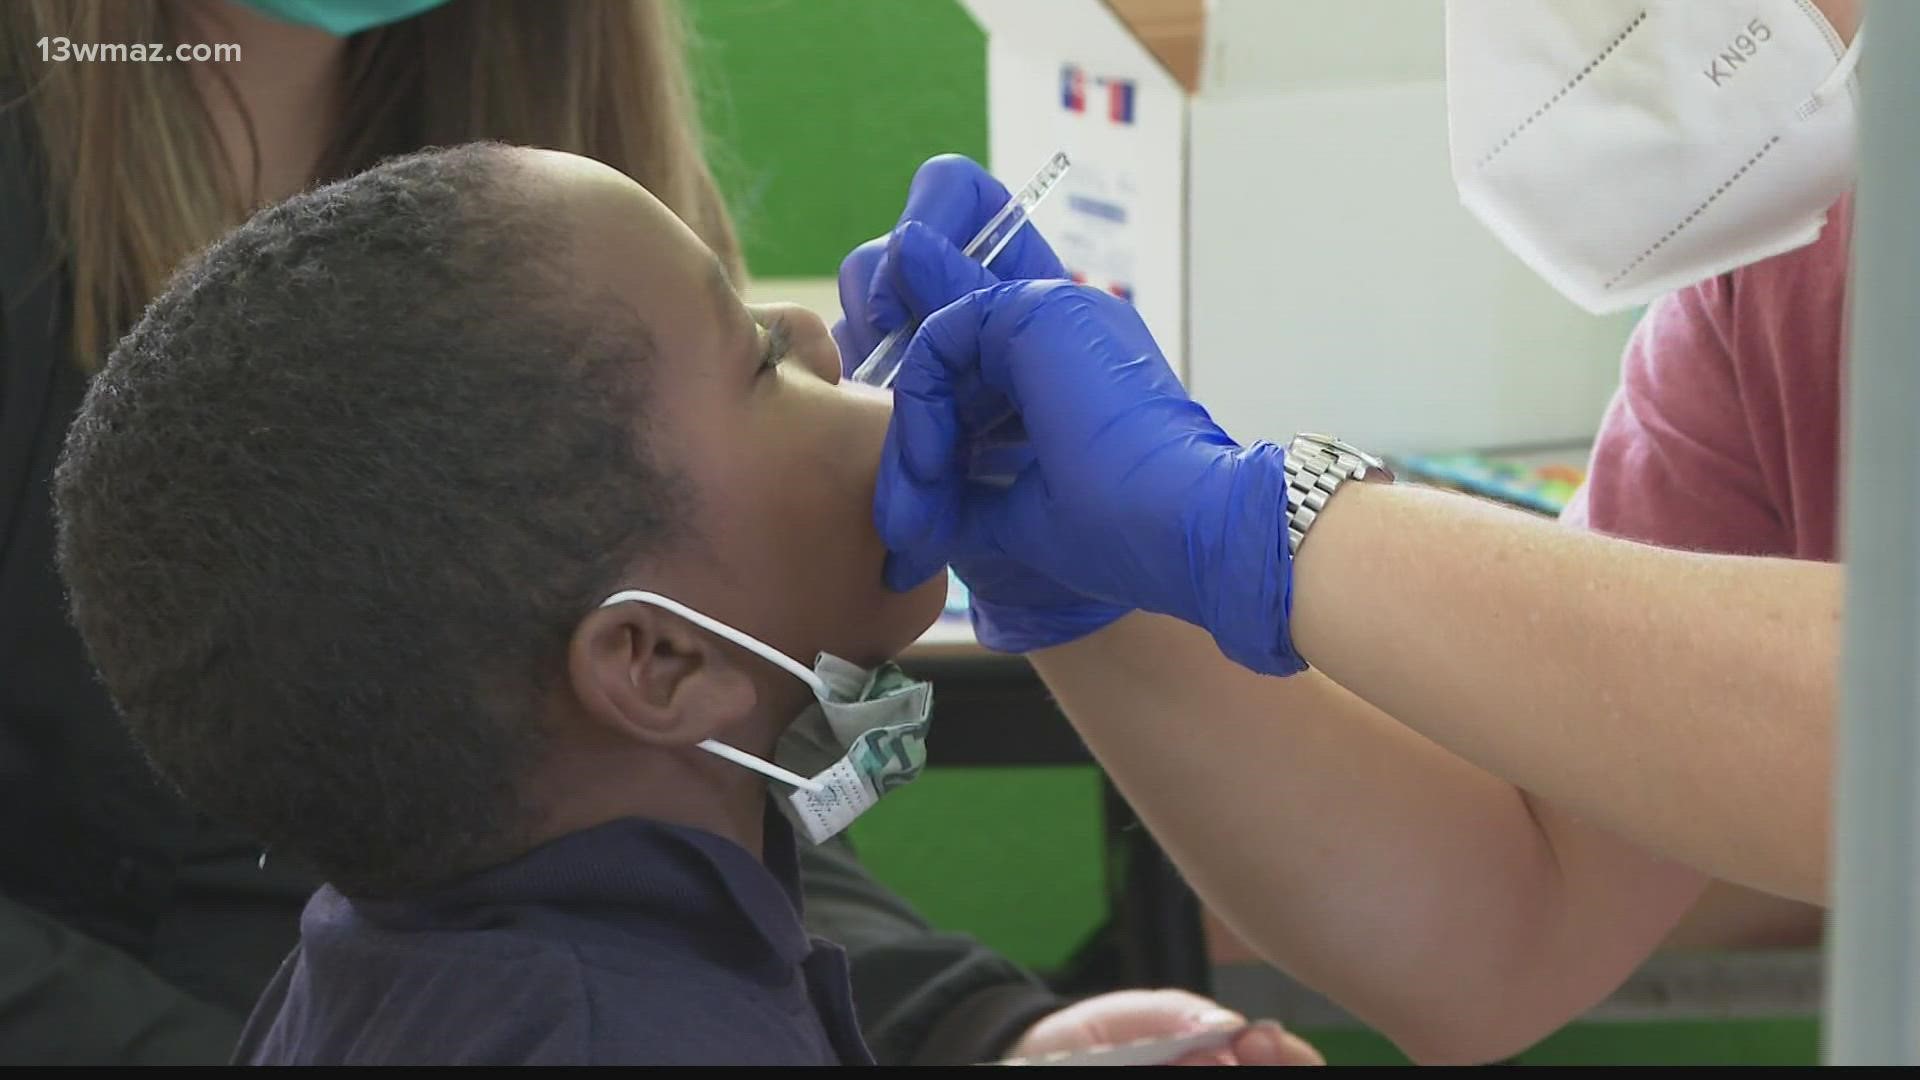 The school district says many students don't have dental insurance, so this is a way of giving medical attention to kids who need it most.